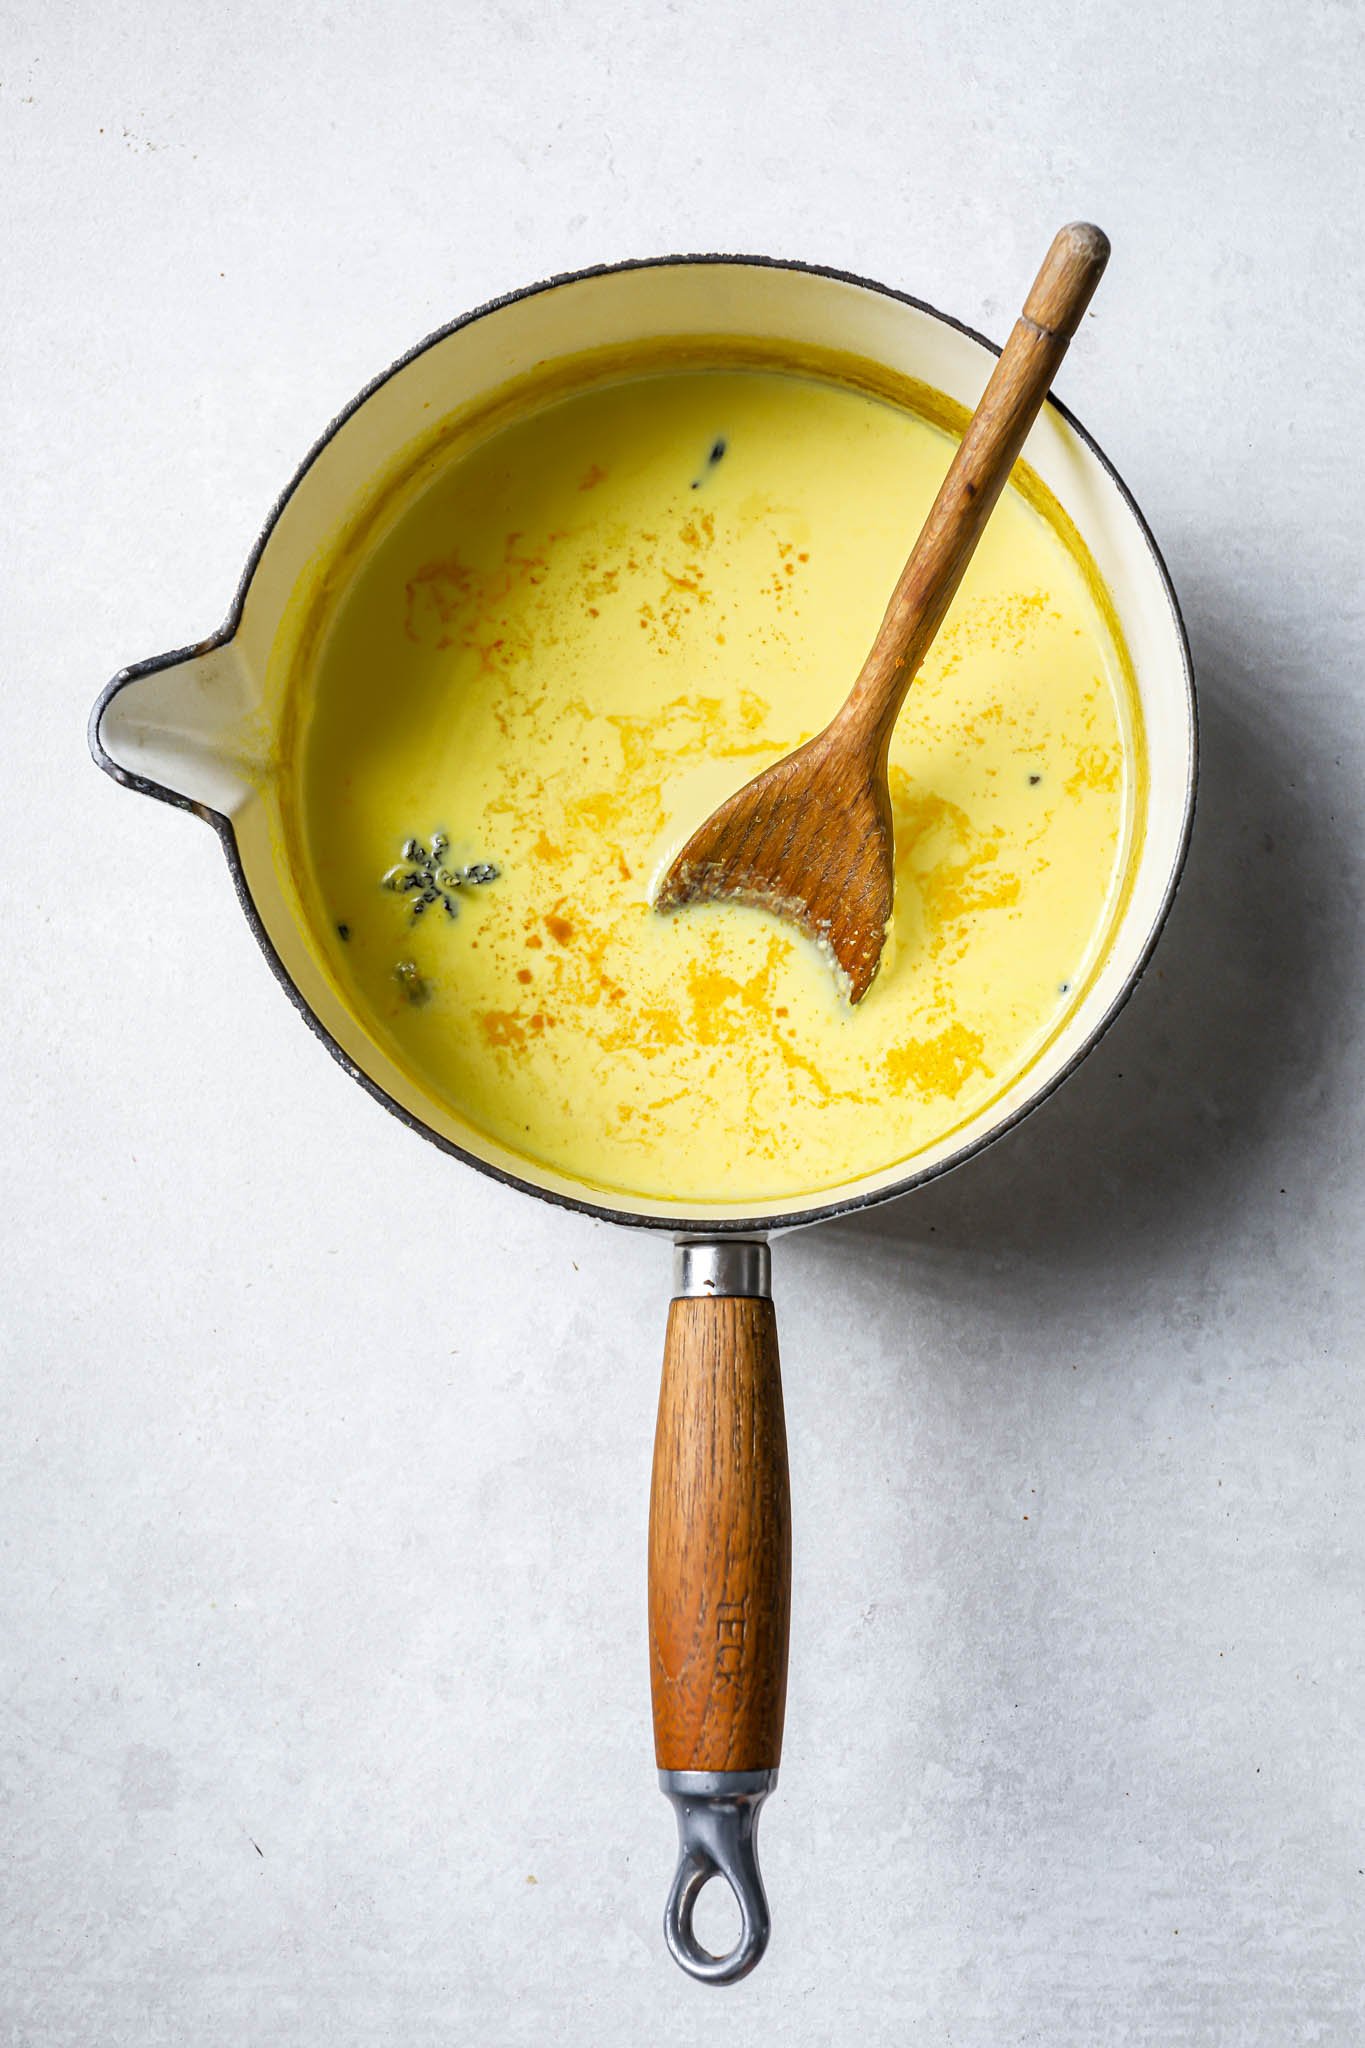 Mixing golden milk ingredients with a wooden spoon.